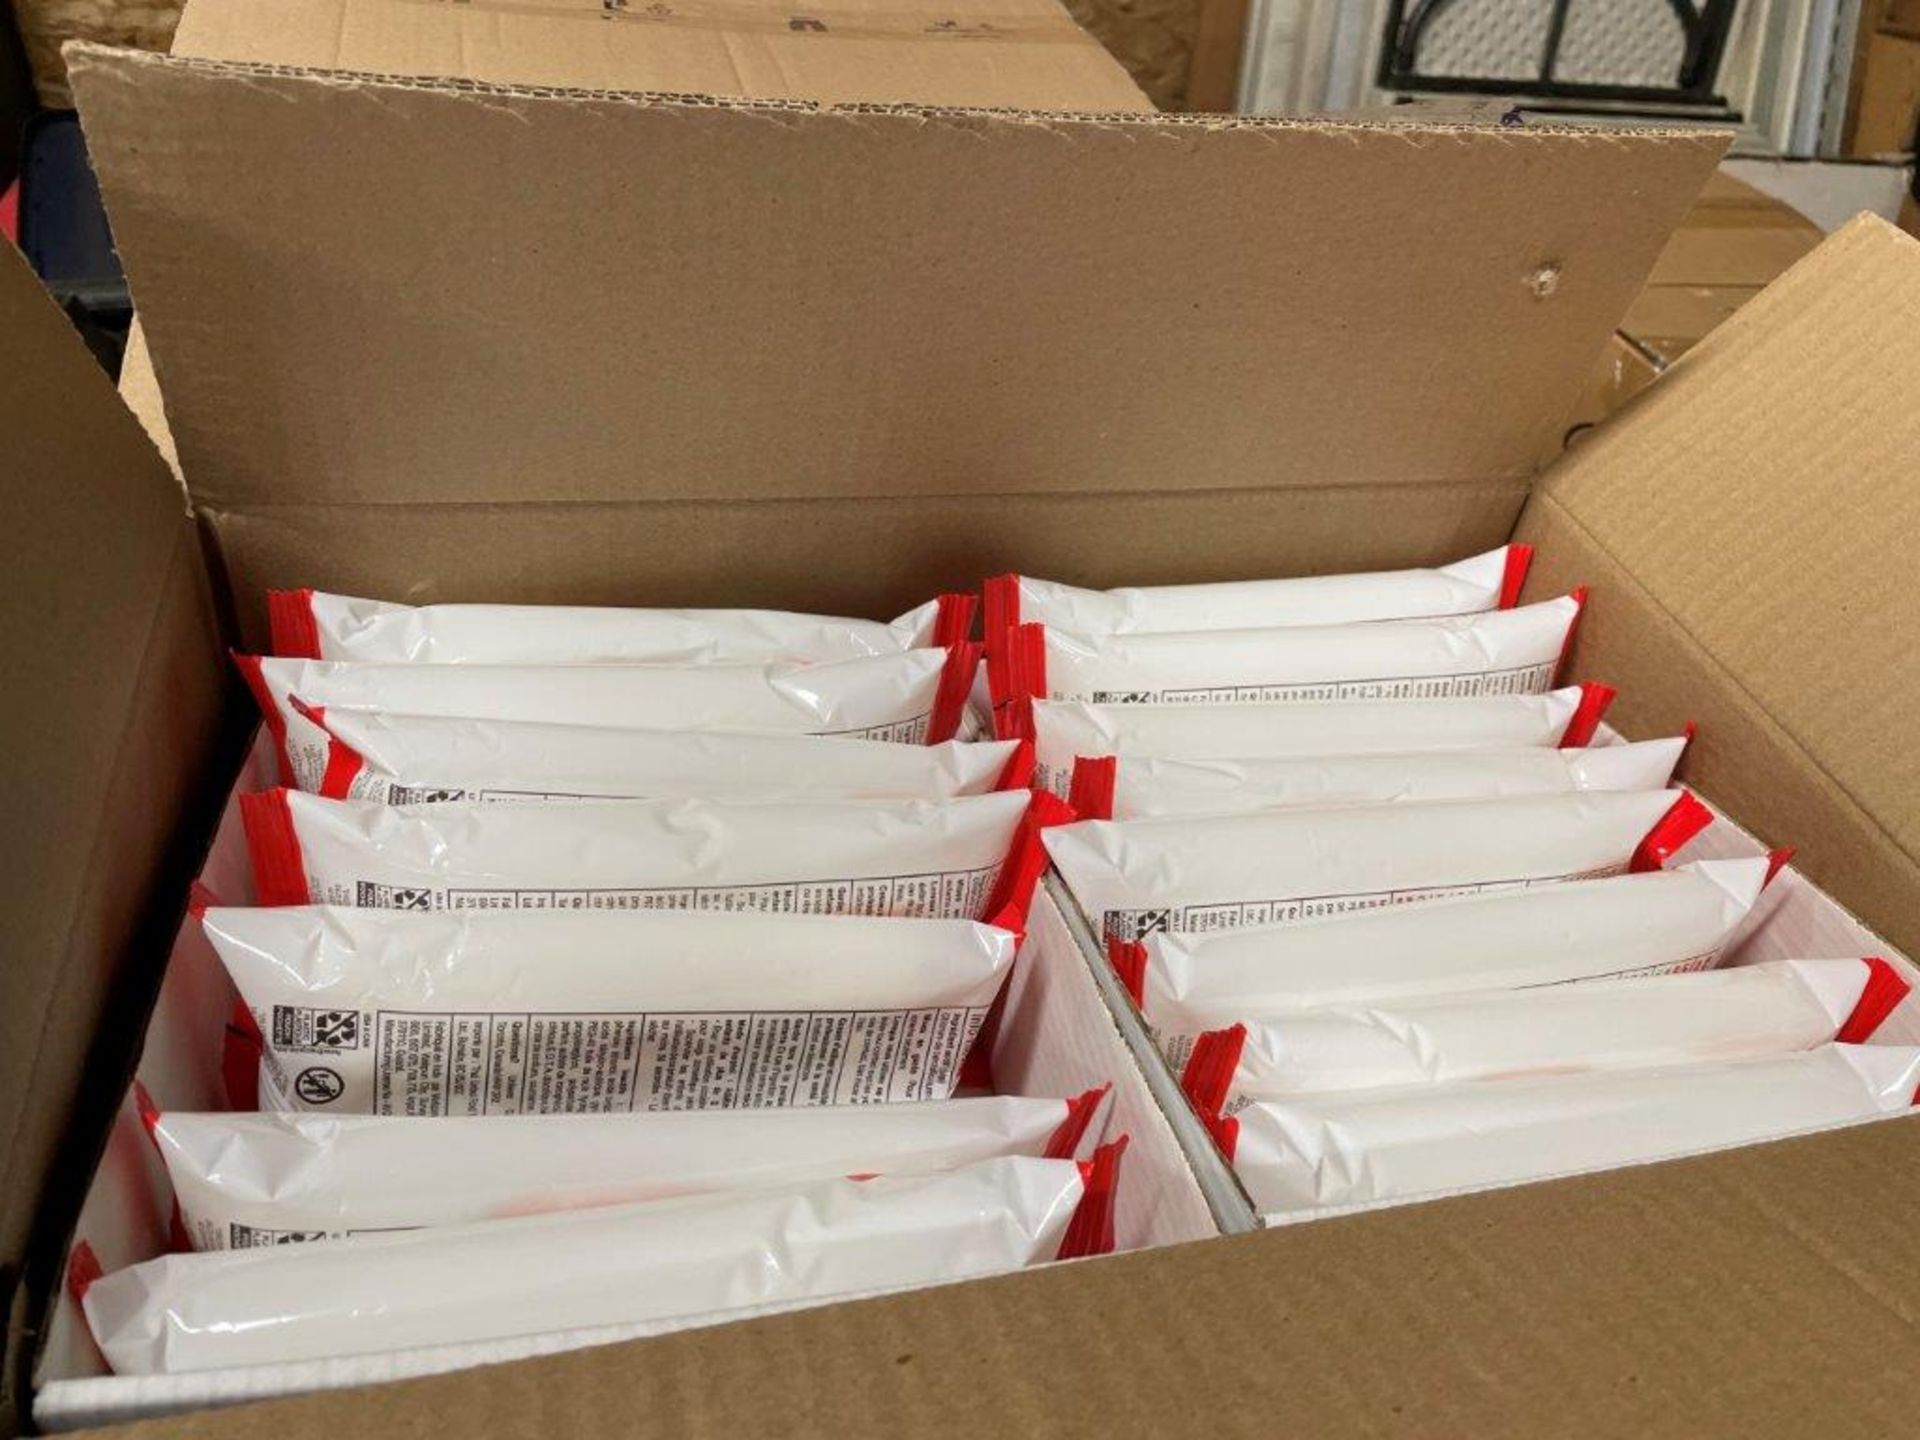 2-BOXES OF LIFEBUOY SANITIZING WIPES 16-PACKAGES PER BOX AND 48-WIPES PER PACKAGE AUGUST 2021 - Image 2 of 4